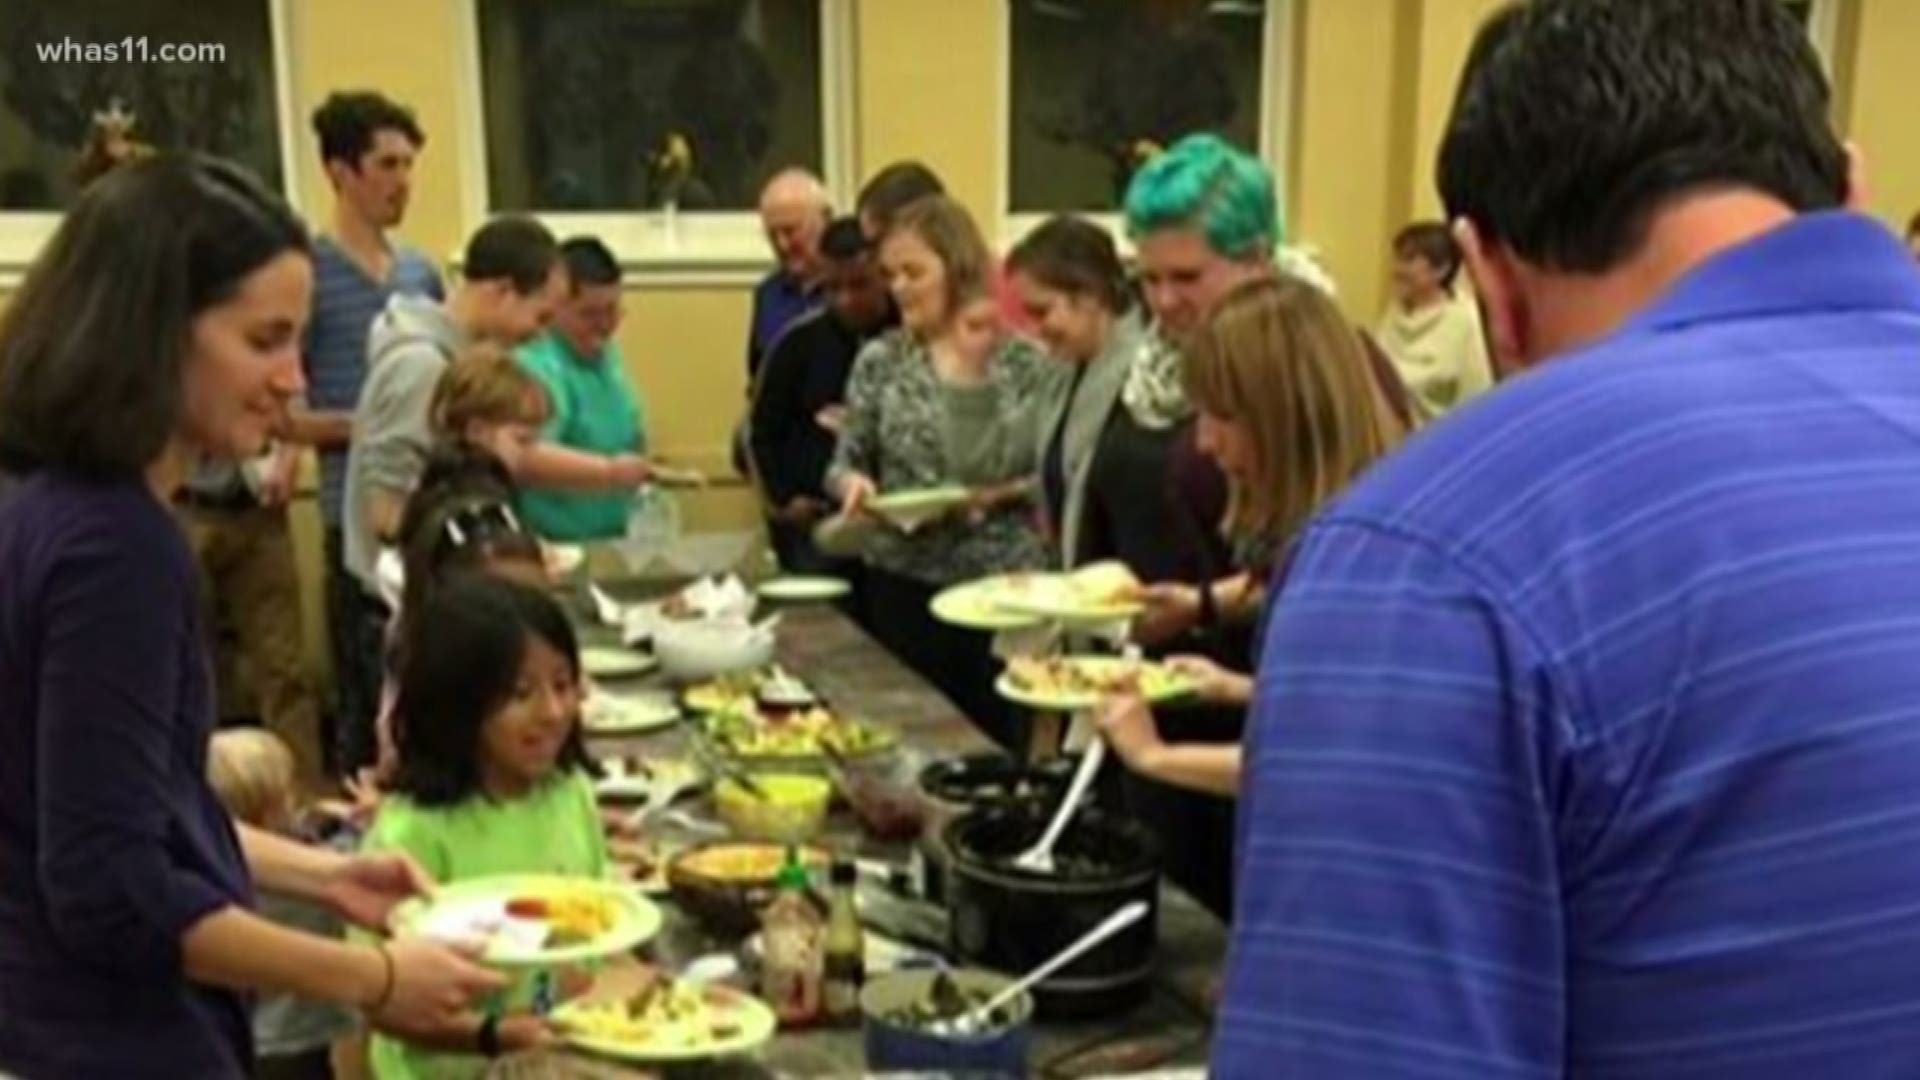 Highland Baptist Church's Soul Supper on Nov. 15 provides a safe space for LGBT community members that may not be welcomed at family Thanksgivings.